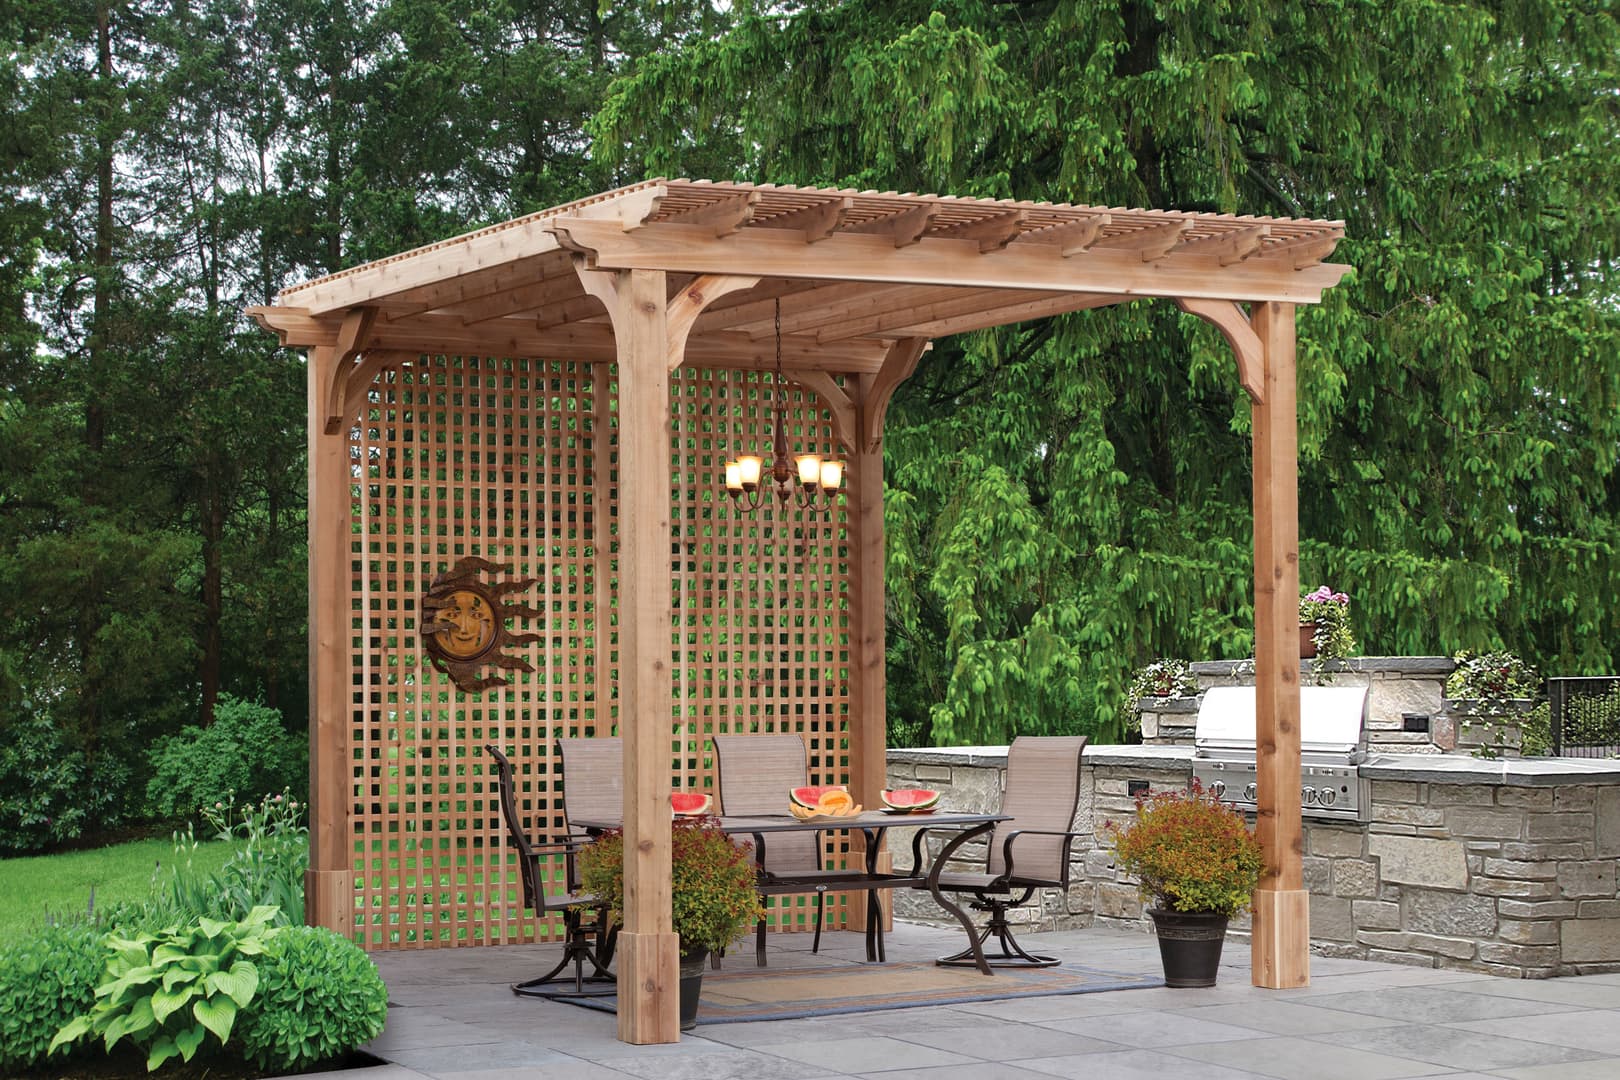 PA Amish Pergola Backyard Structures in Lehigh Valley 